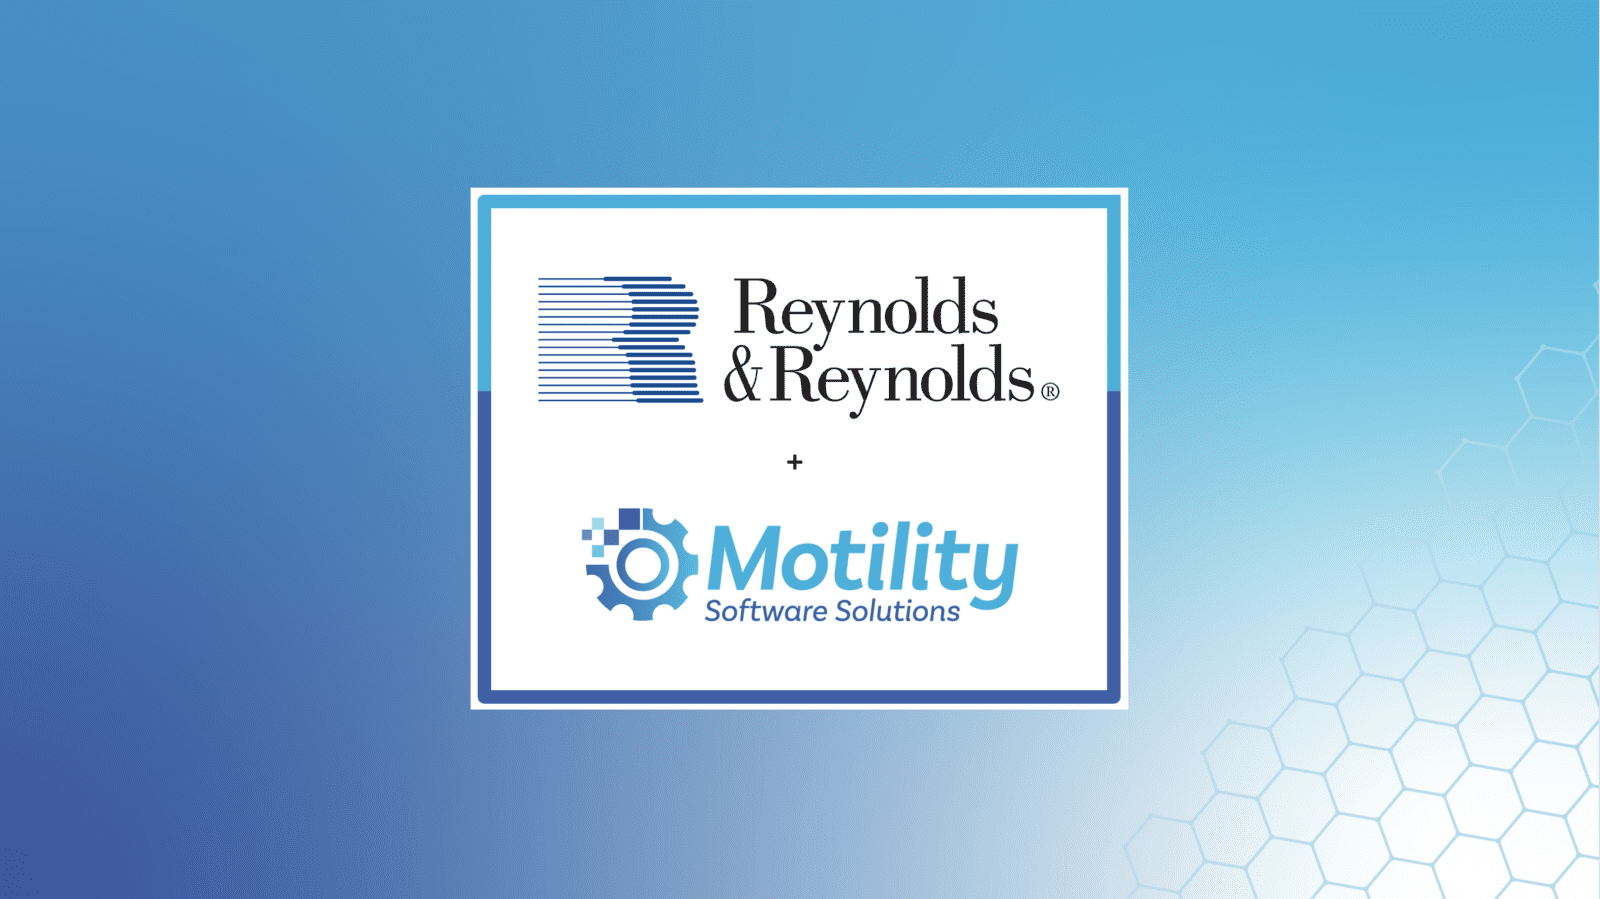 Motility Software acquired by Reynolds and Reynolds